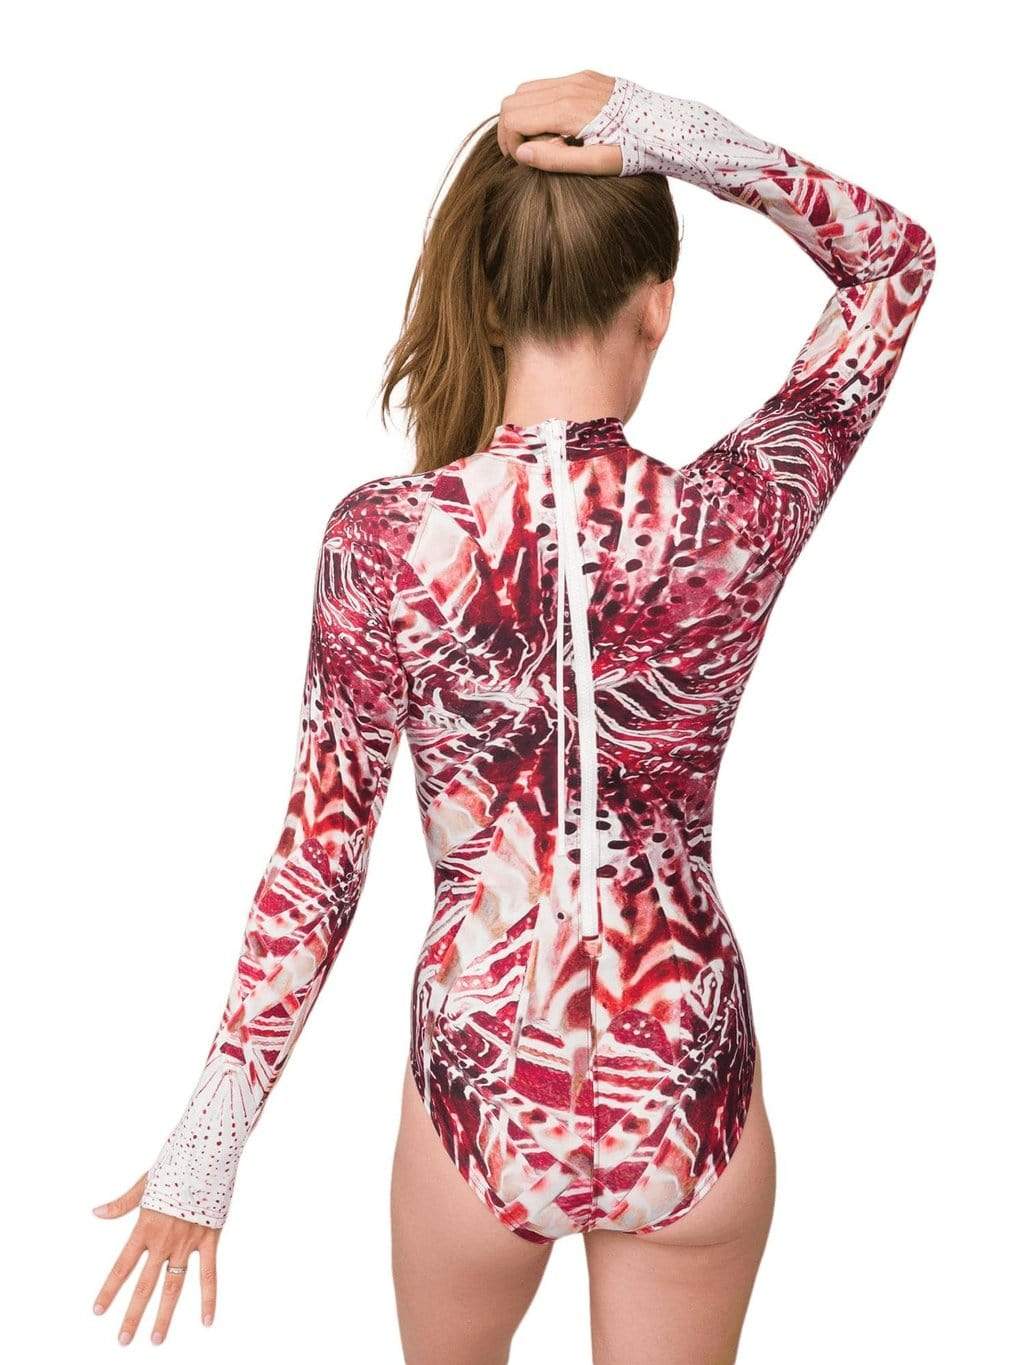 1-piece Swimsuits for Women Surfing Diving Rashguard Swimsuits